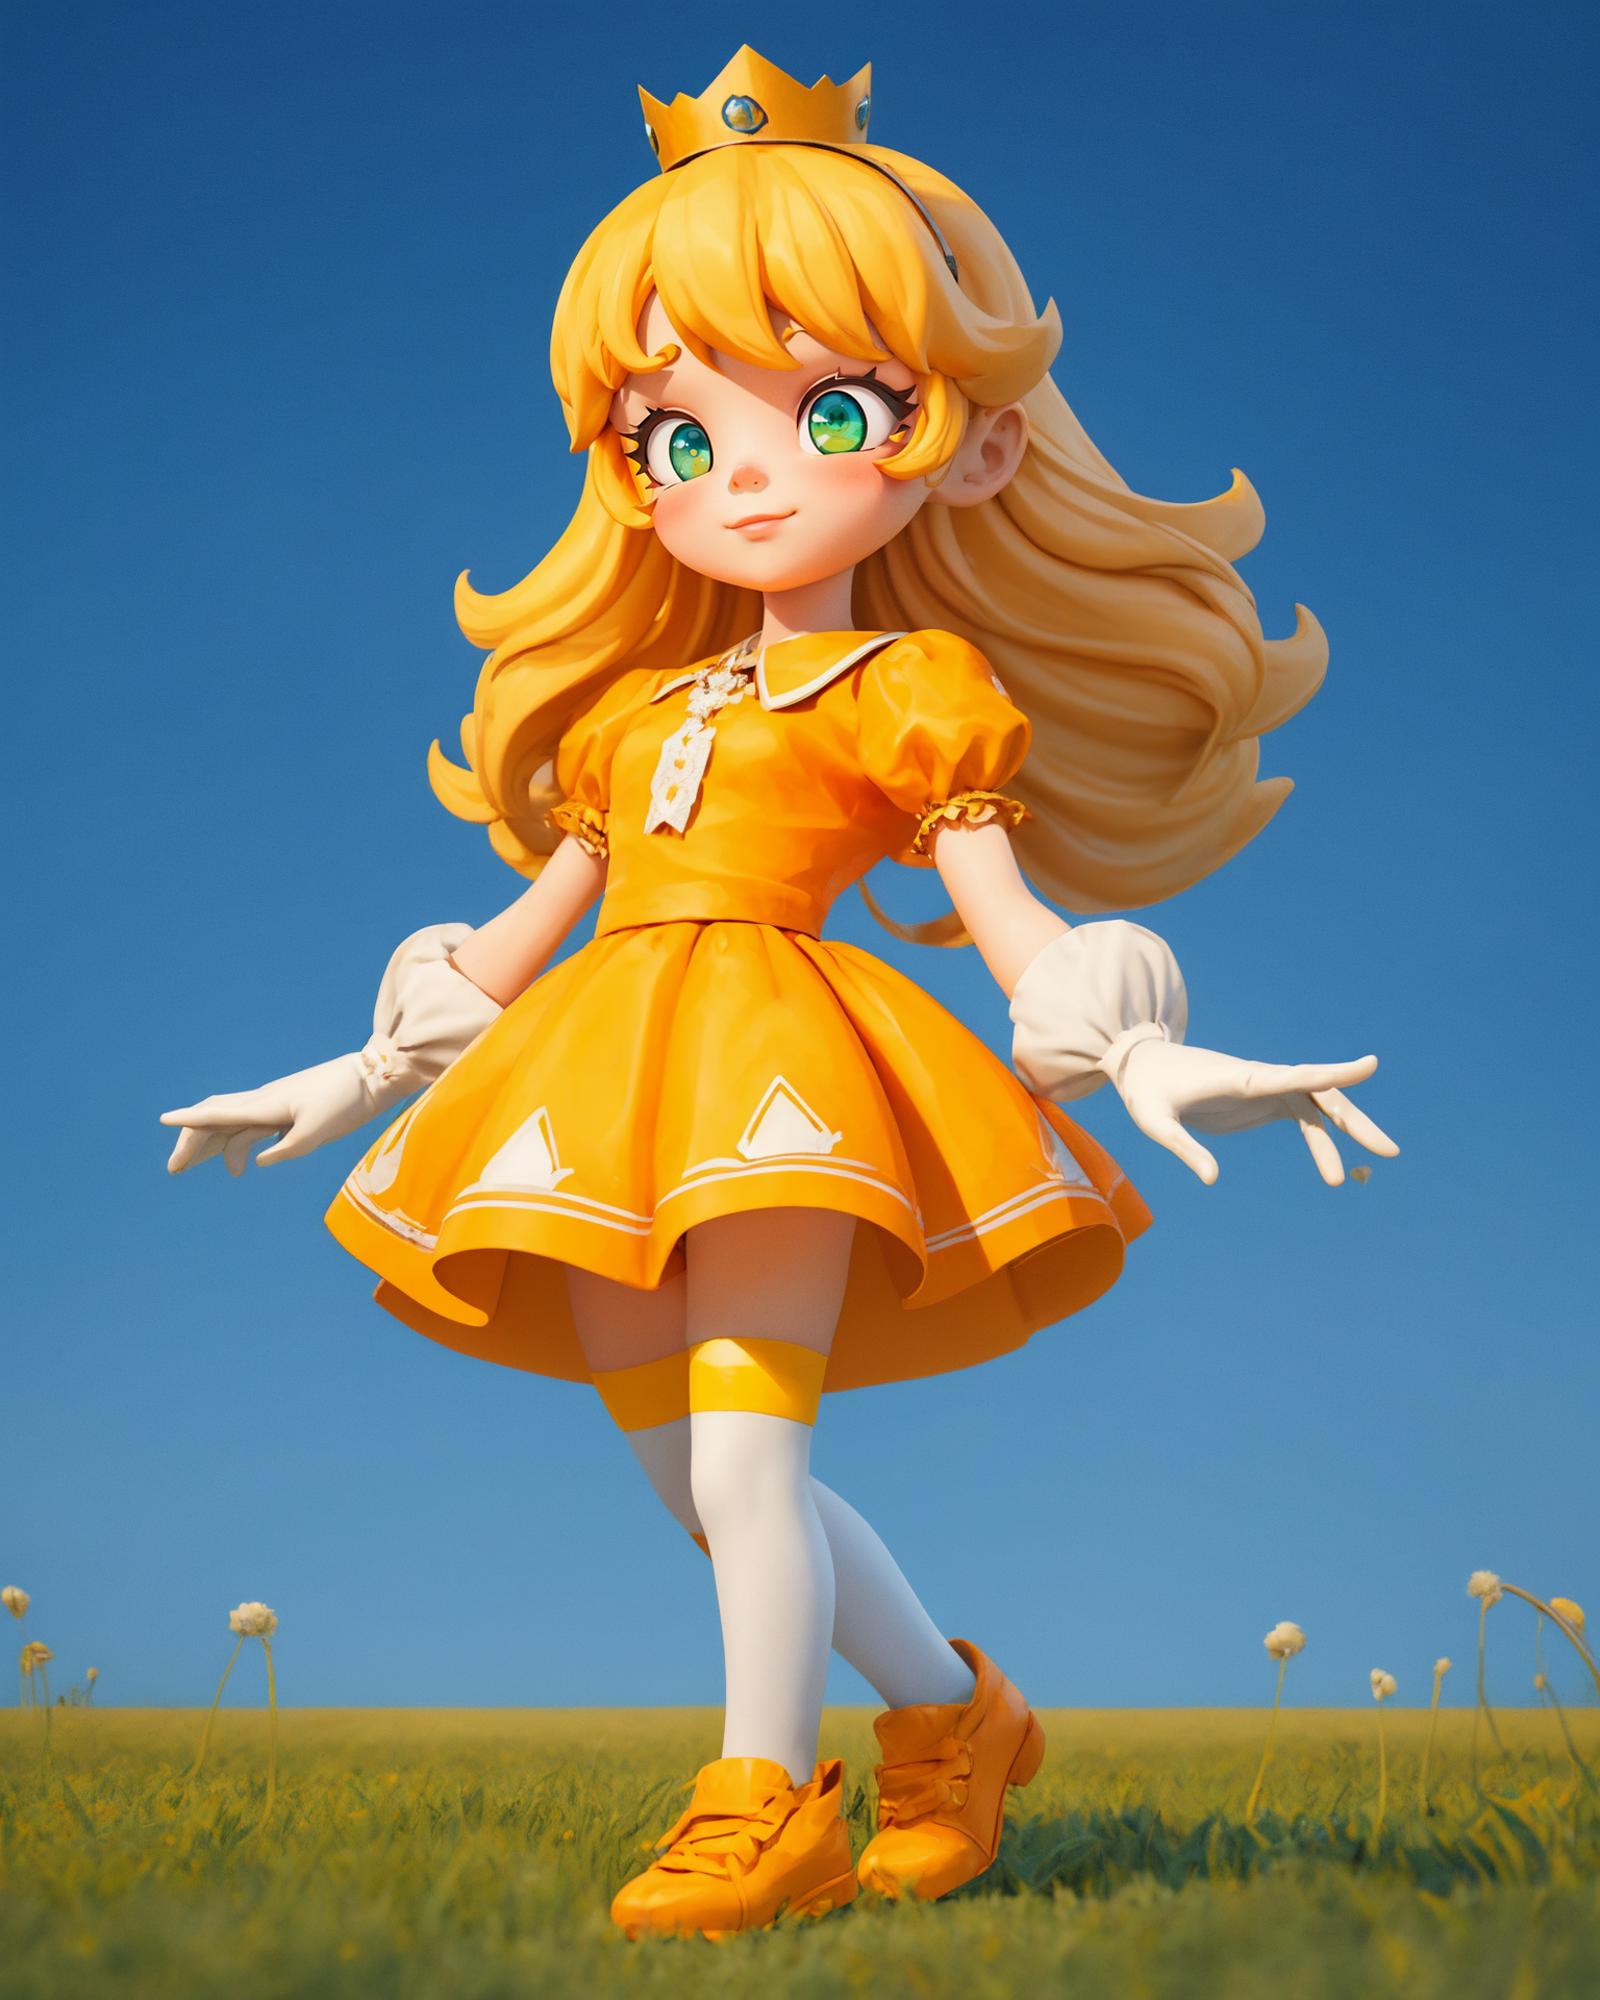 A doll with a bright orange dress posing in the field.